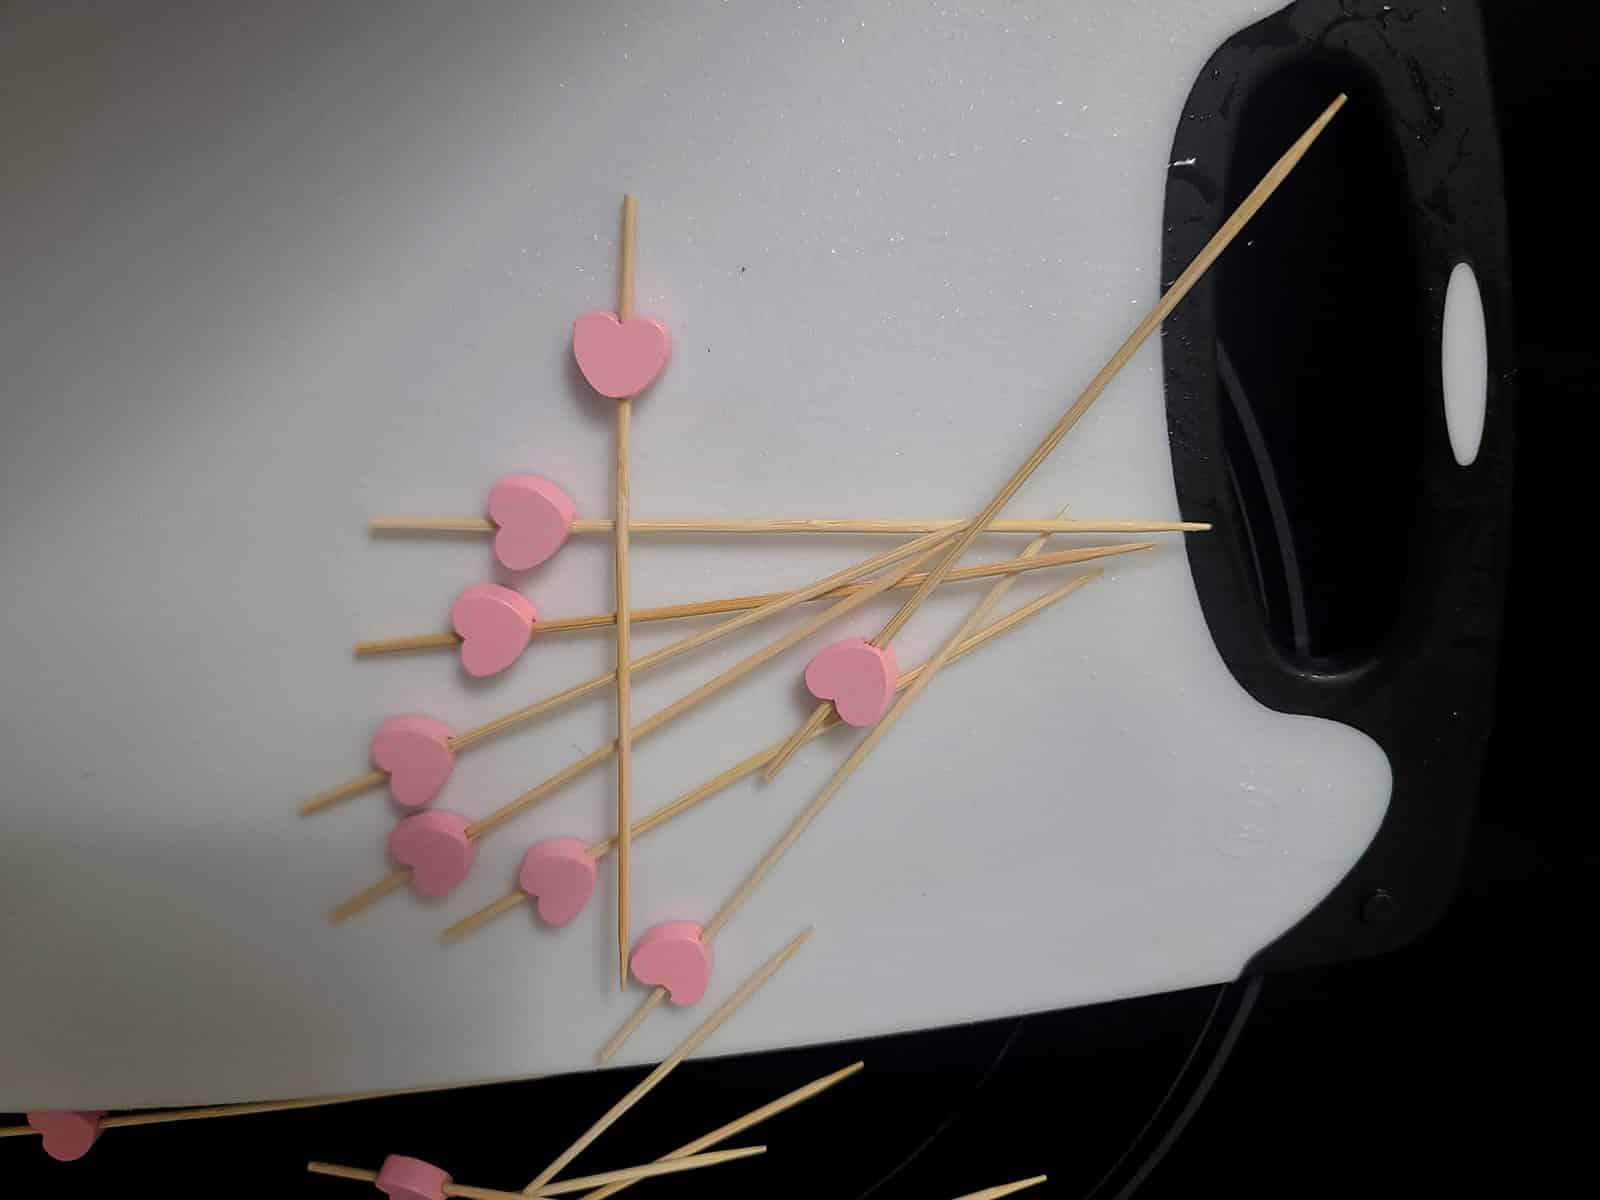 Several skewers with a pink heart decoration on the end, spread on a white cutting board.